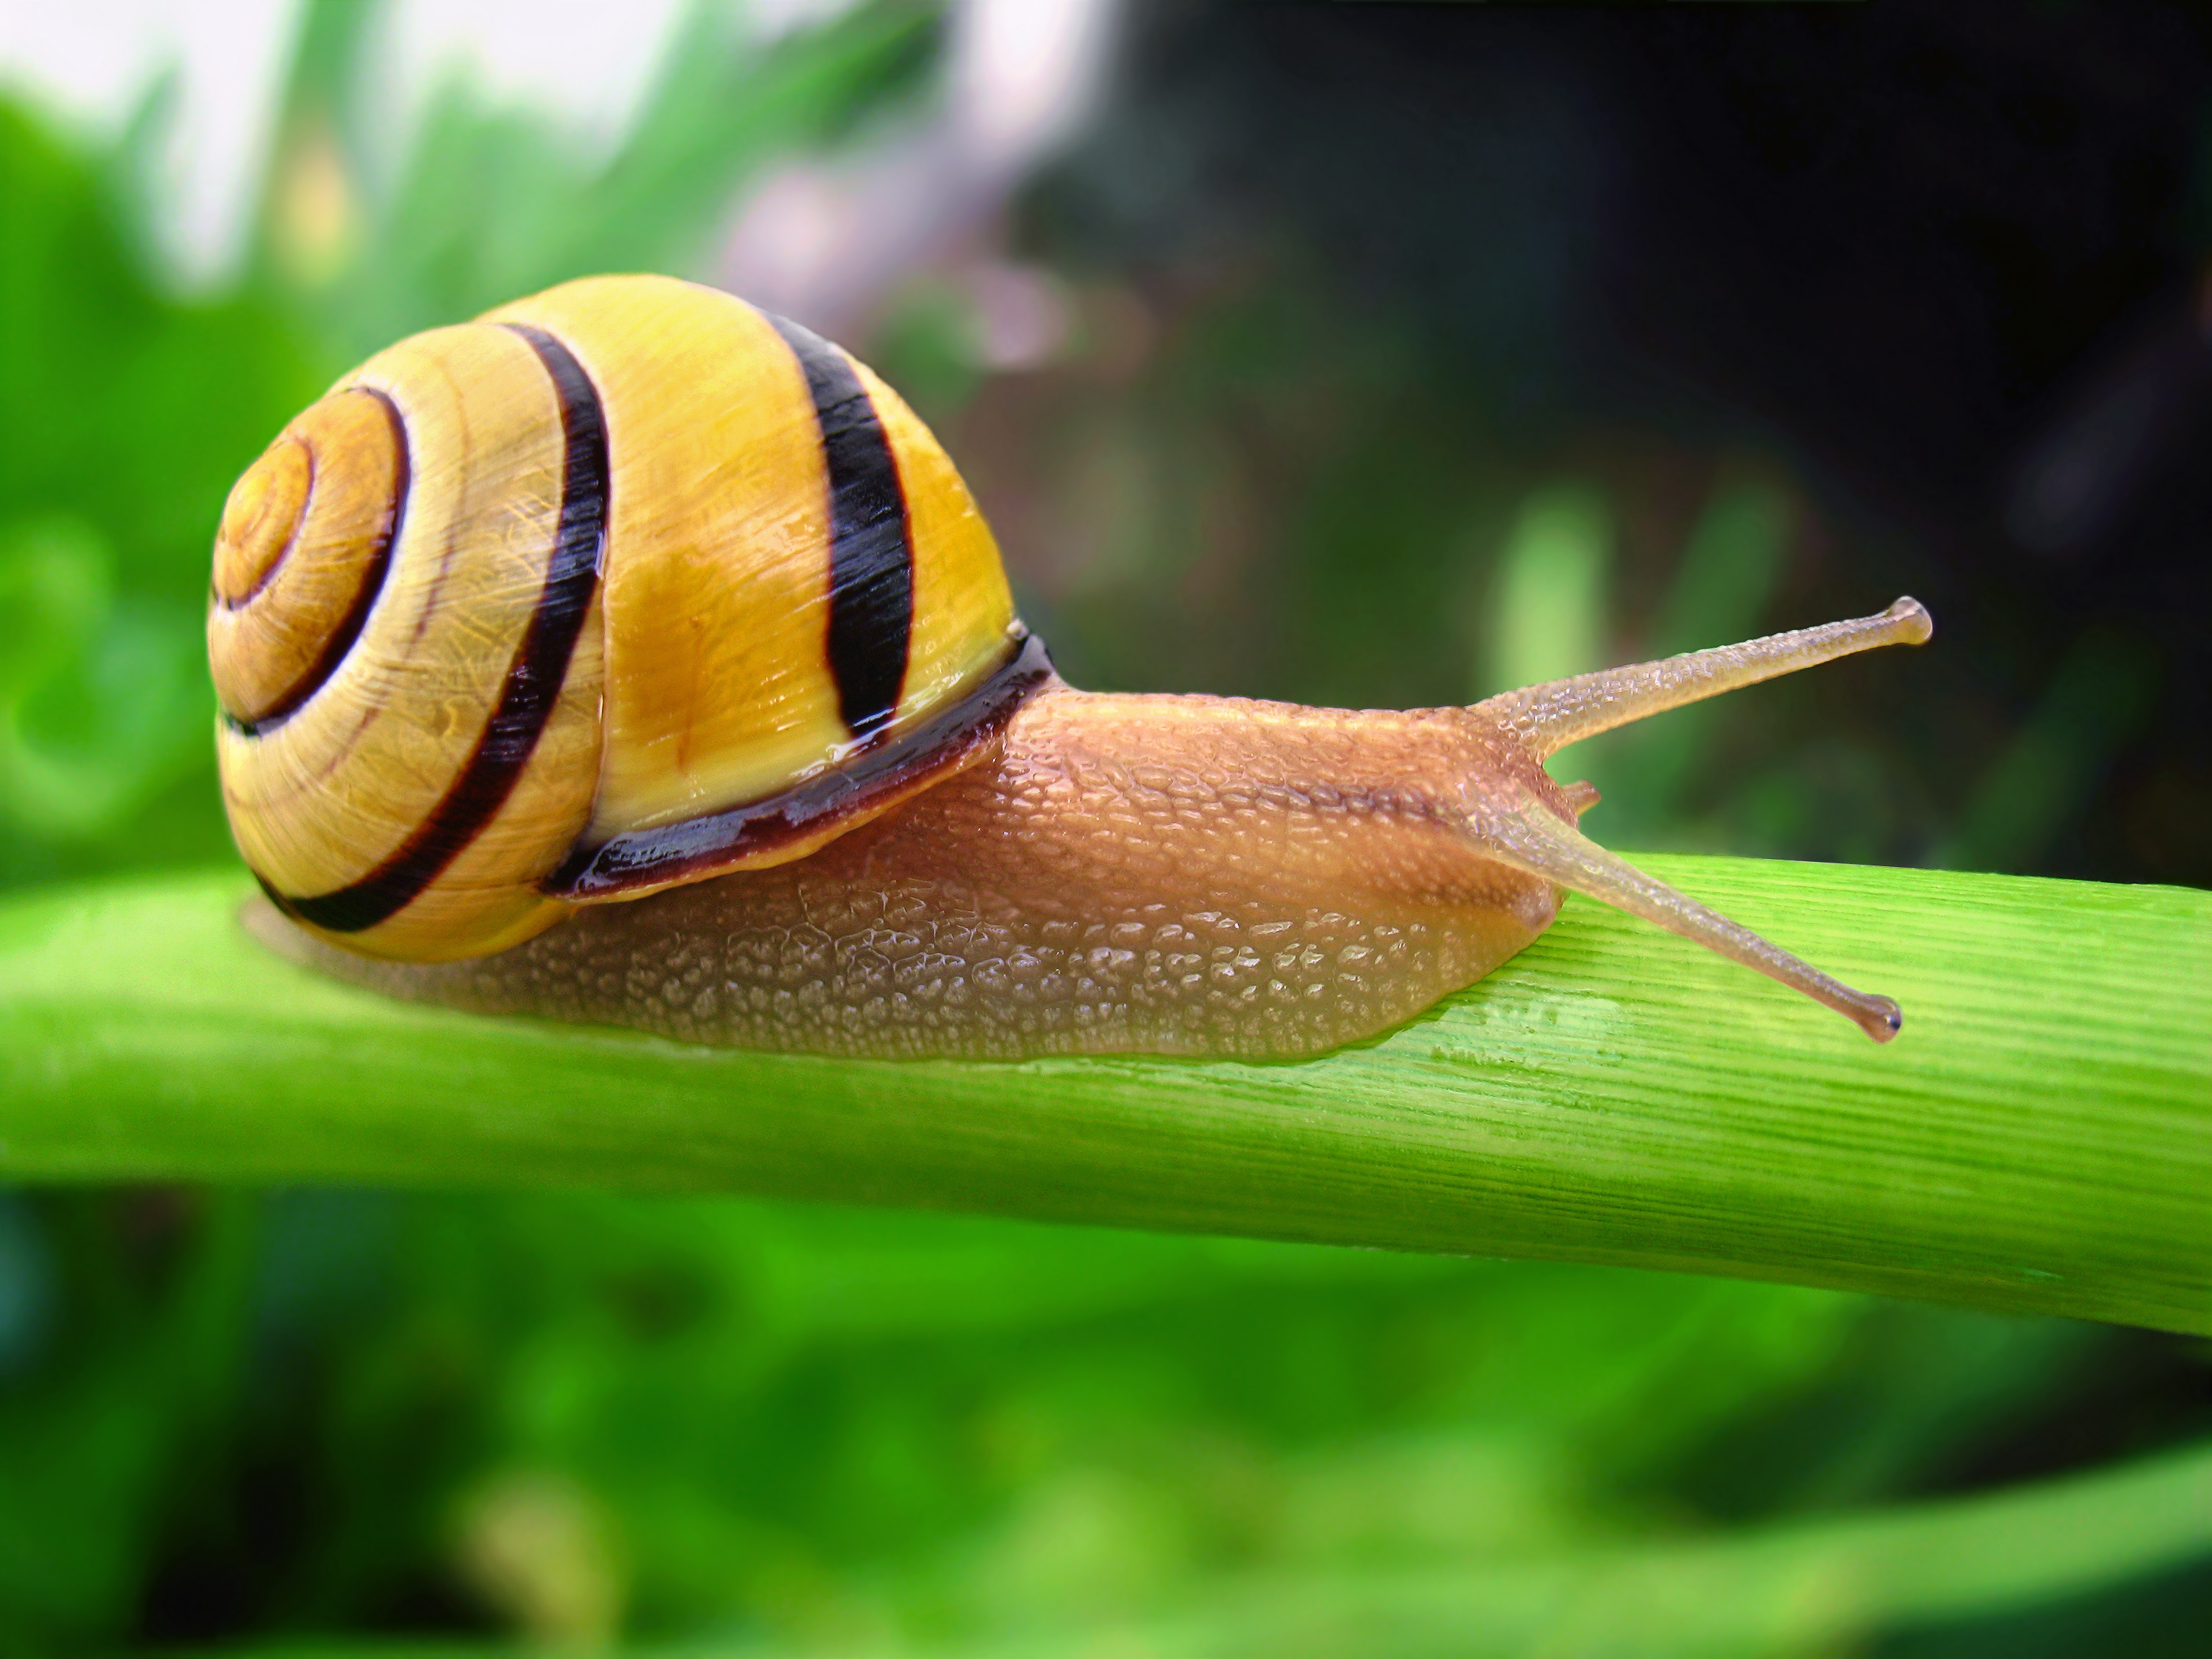 Snail Cream: Is This New Ingredient Good for Your Skin? - AskDrManny